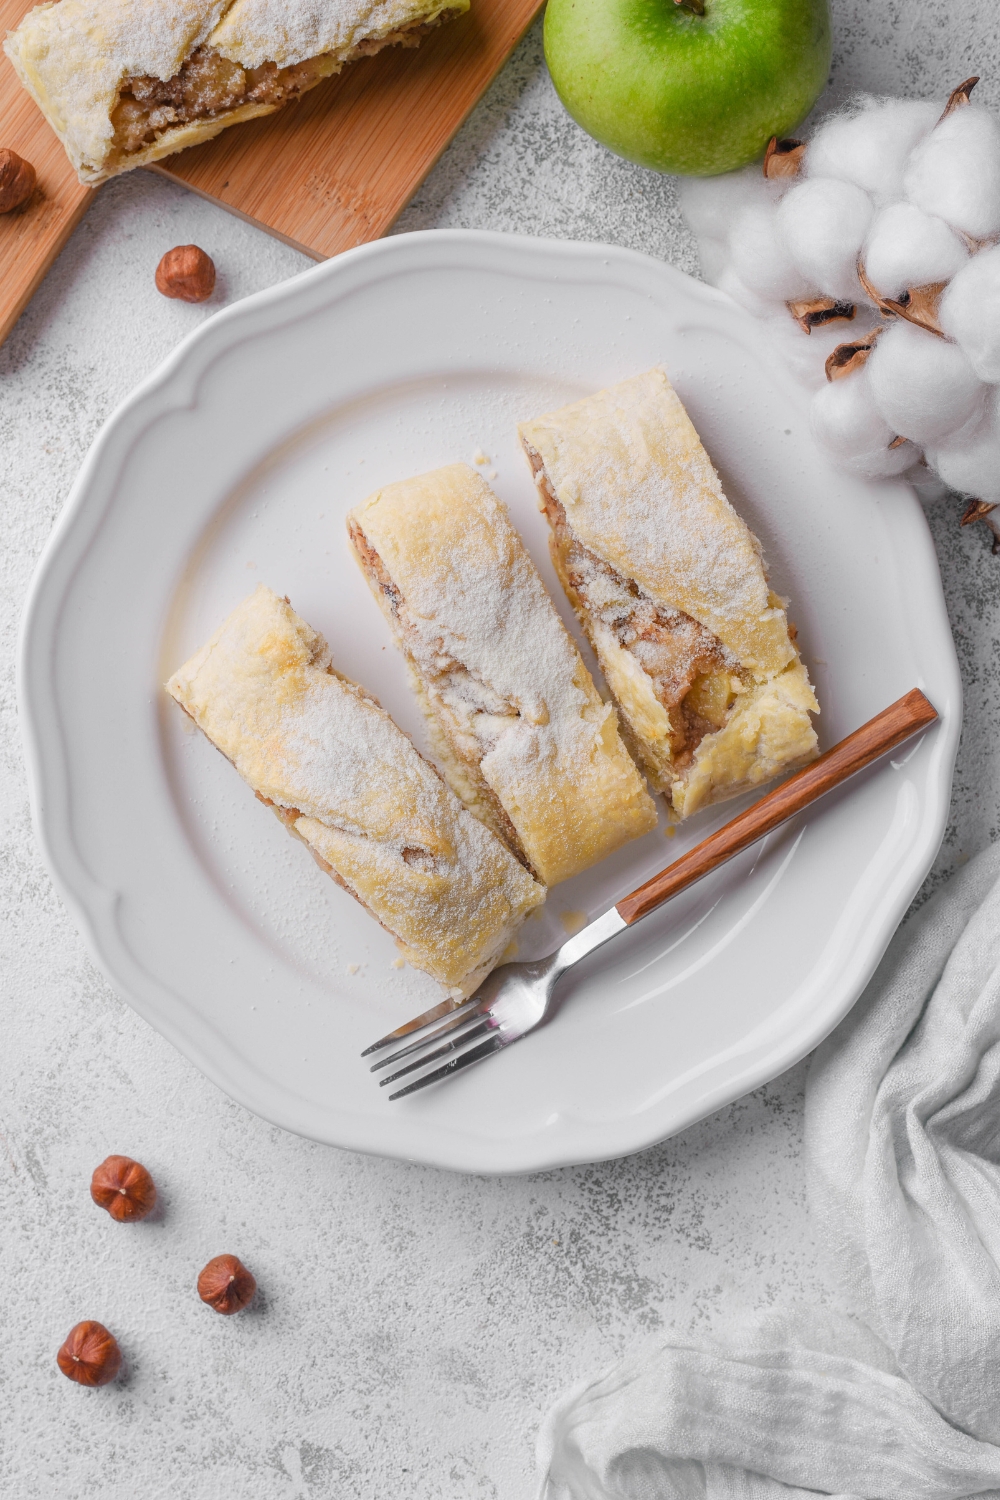 Overhead view of sliced apple strudel dusted with powdered sugar and served with a fork.